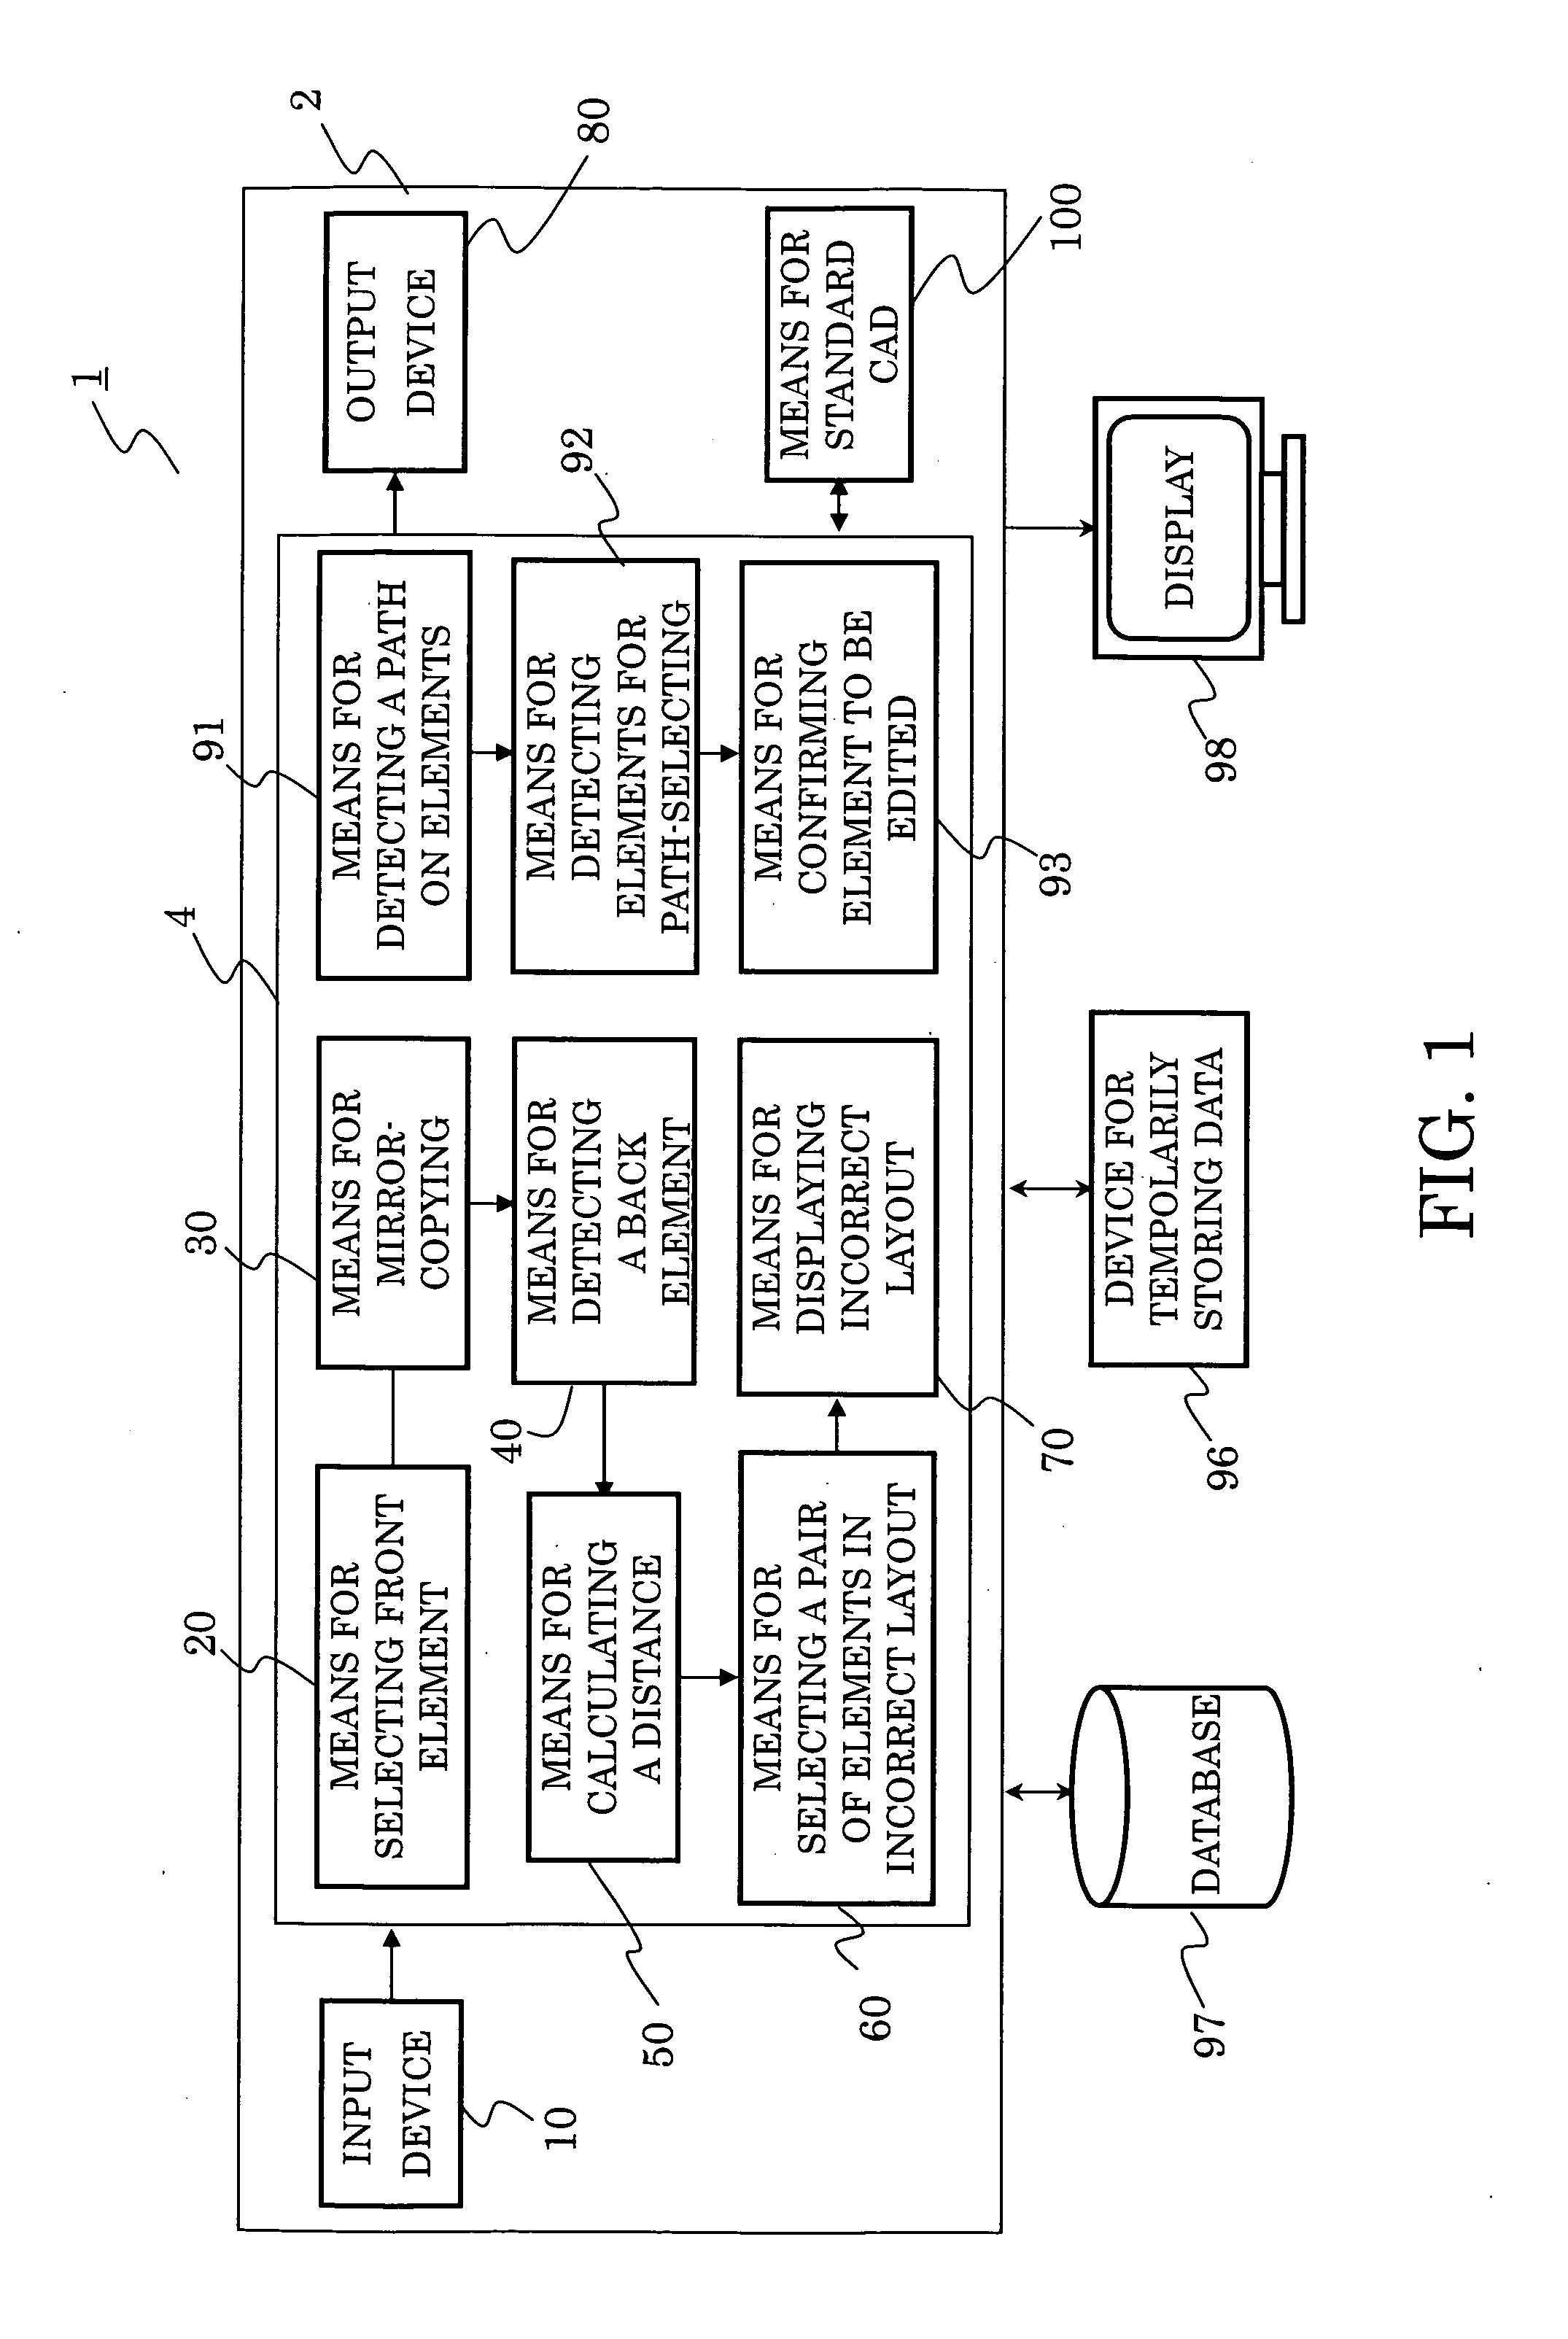 Printed circuit board design support apparatus, method, and program medium therefor